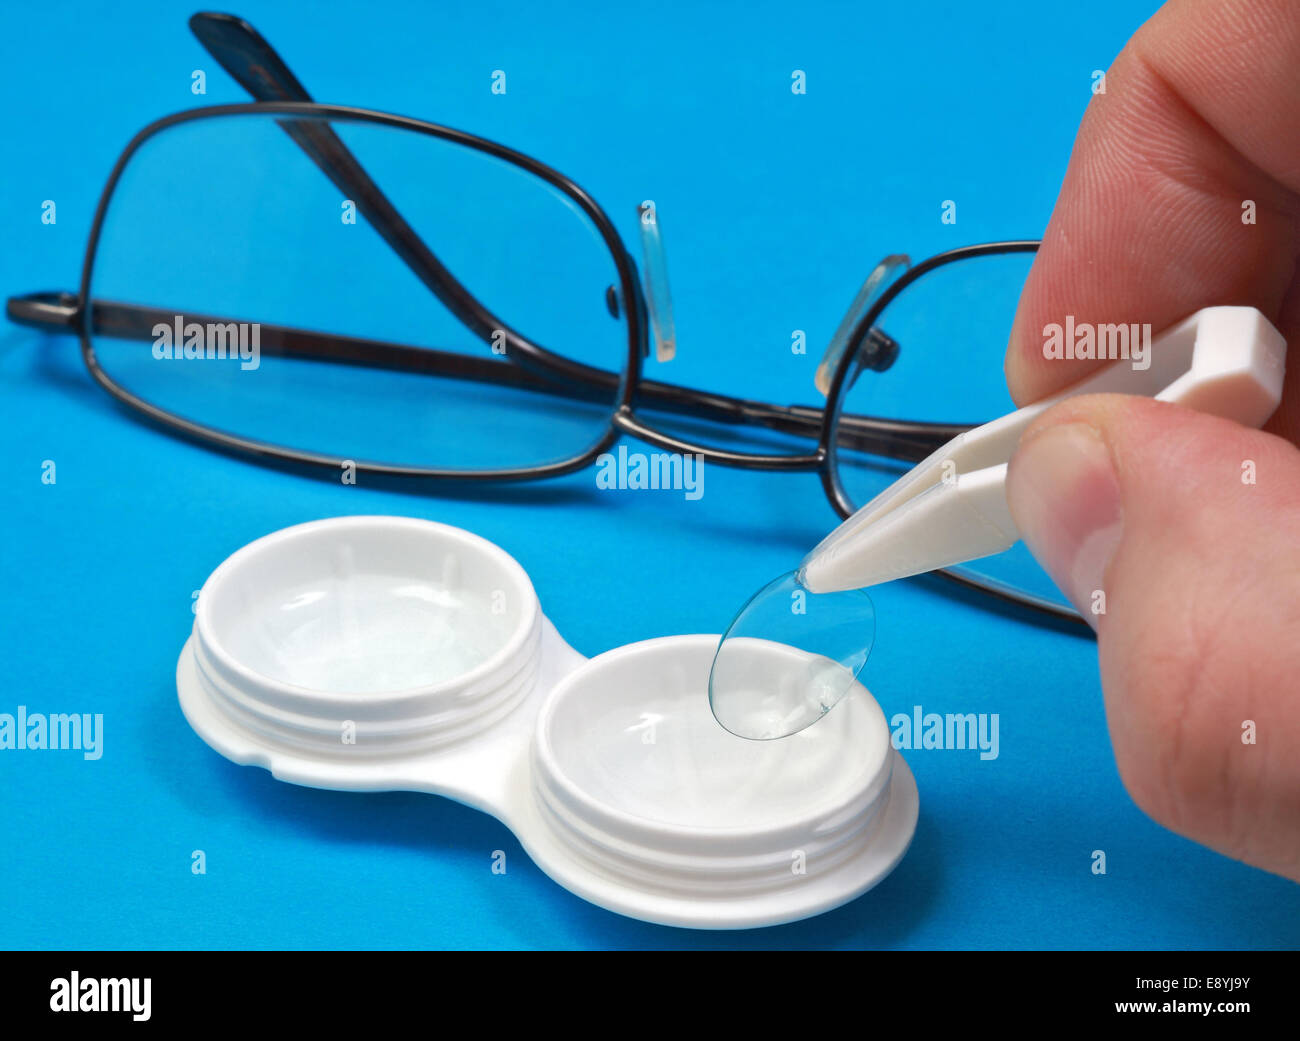 Removing the contact lens from its case Stock Photo